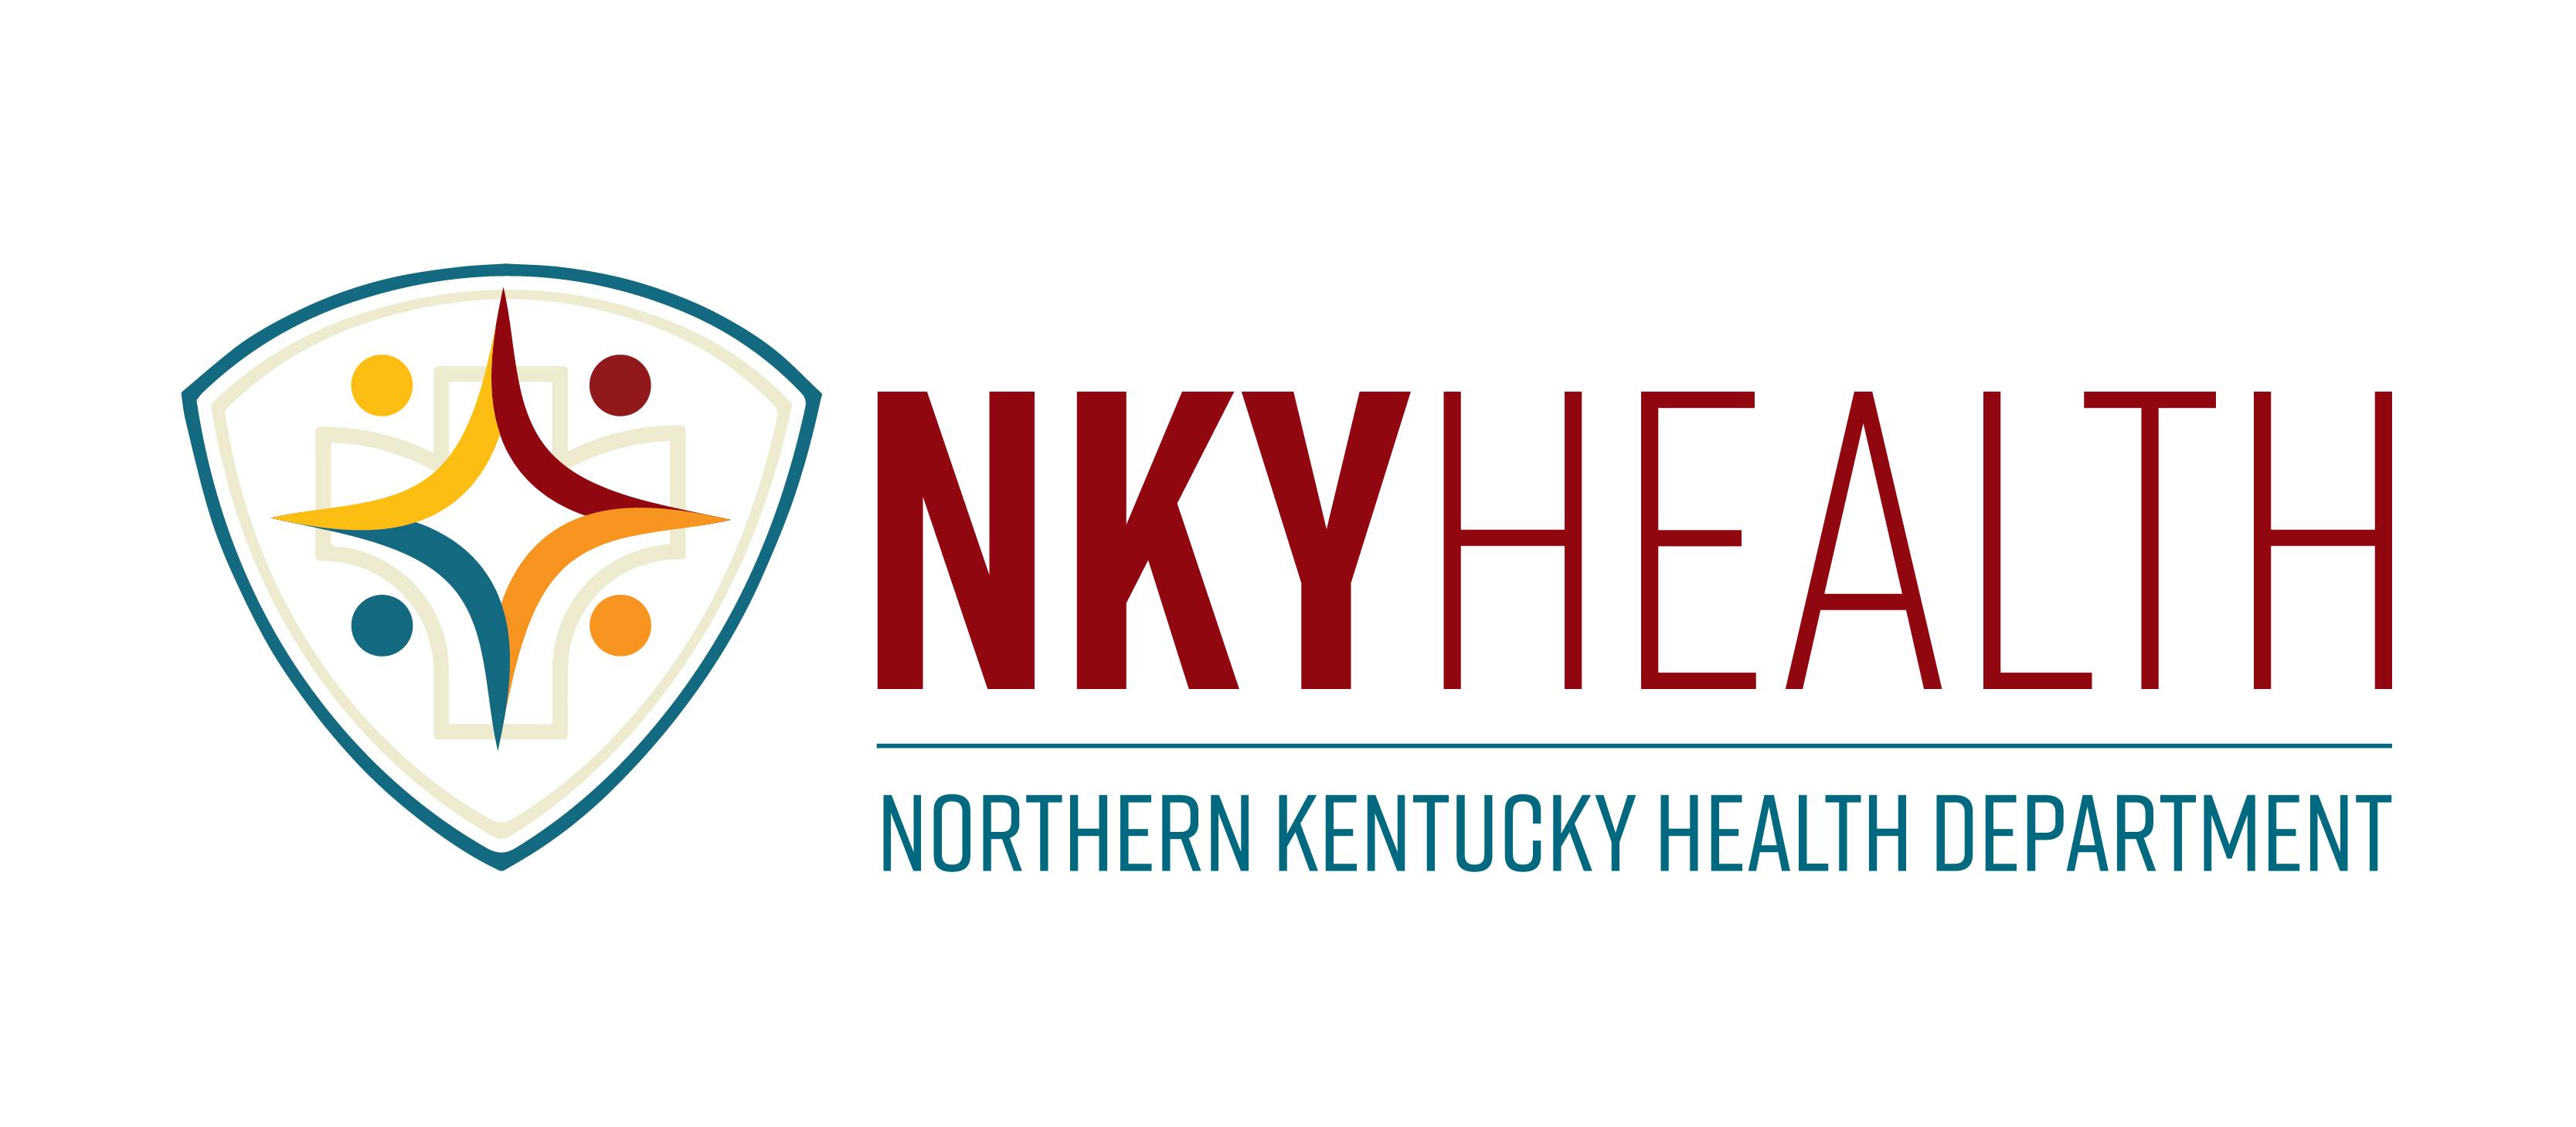 NKY Health April 9, 2020 Food Manager Certification Class - AM Class